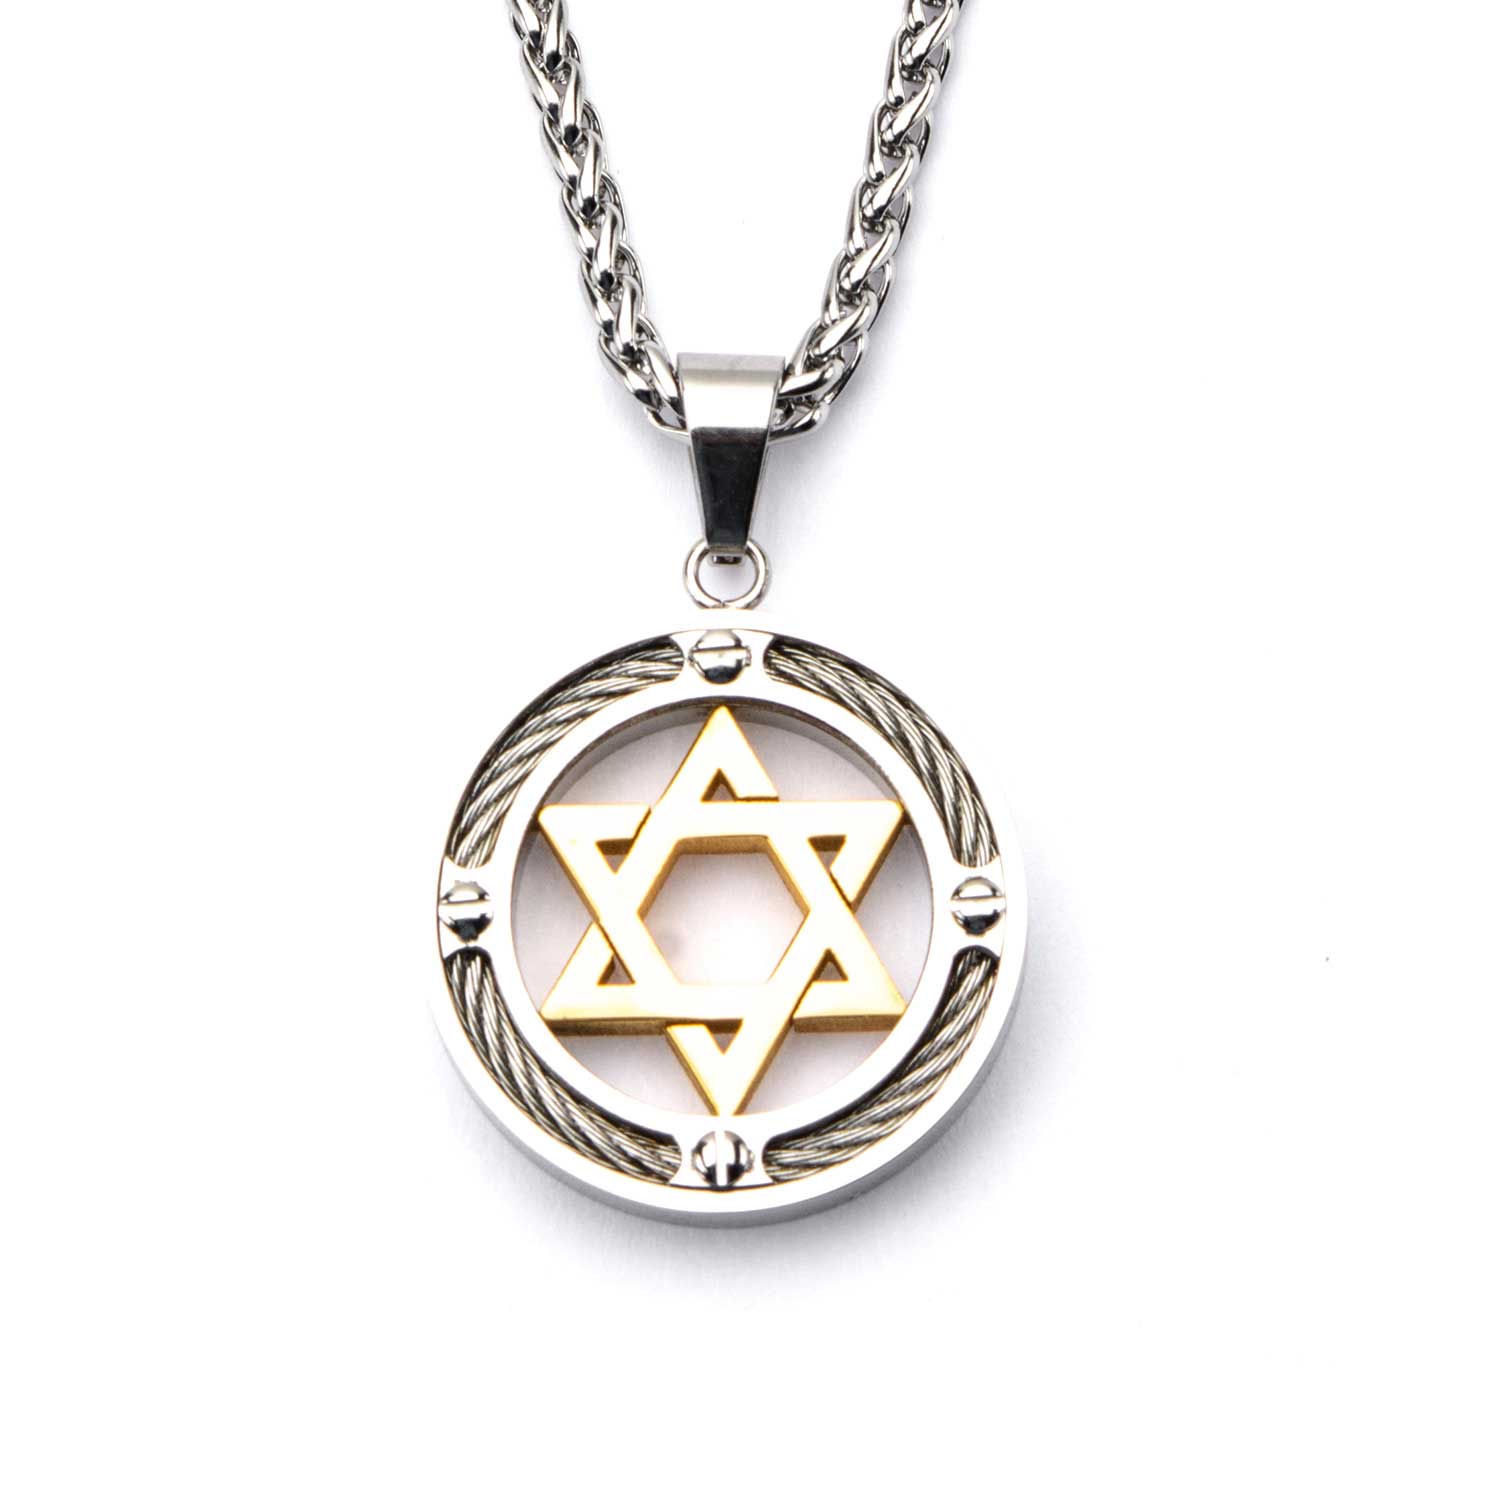 Steel Gold Plated Star of David with Cable Inlayed in Circle Pendant K. Martin Jeweler Dodge City, KS